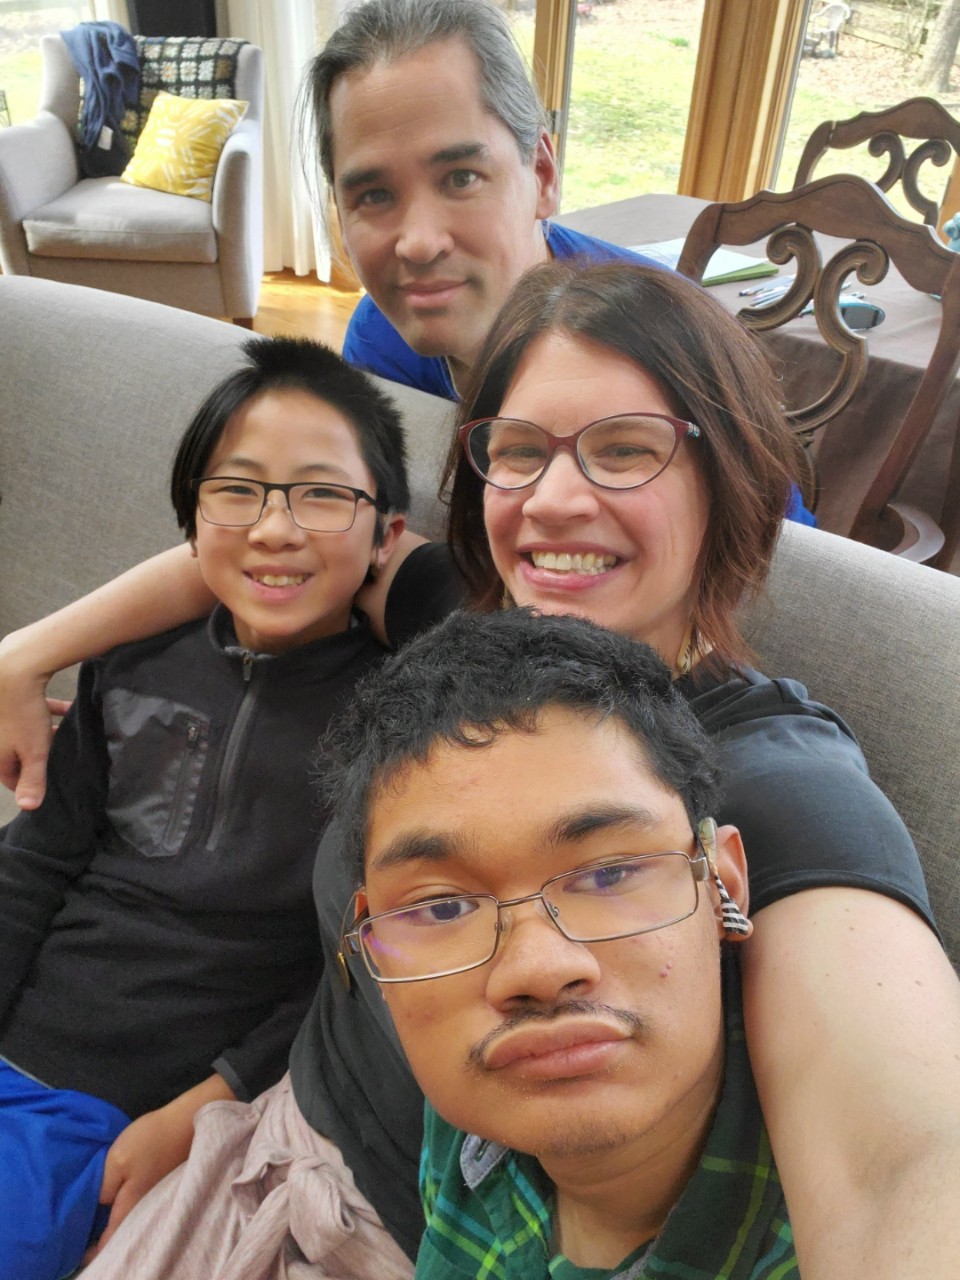 a family photo of the Guilarans – husband and father Fonsie is kneeling behind a couch where the rest of the family is sitting; the younger son Xiao Yu on one side of mom and wife Leslie, and the older teen son Angel on the other side; Leslie’s arms are around both of her sons. Leslie is a white woman with short brown hair, glasses and a big smile. Both sons are Southeast Asian and have short black hair and wire-rimmed glasses. Angel has a short mustache and a visible cochlear implant on one ear. Fonsie is Filipino and has long black hair pulled back in a ponytail